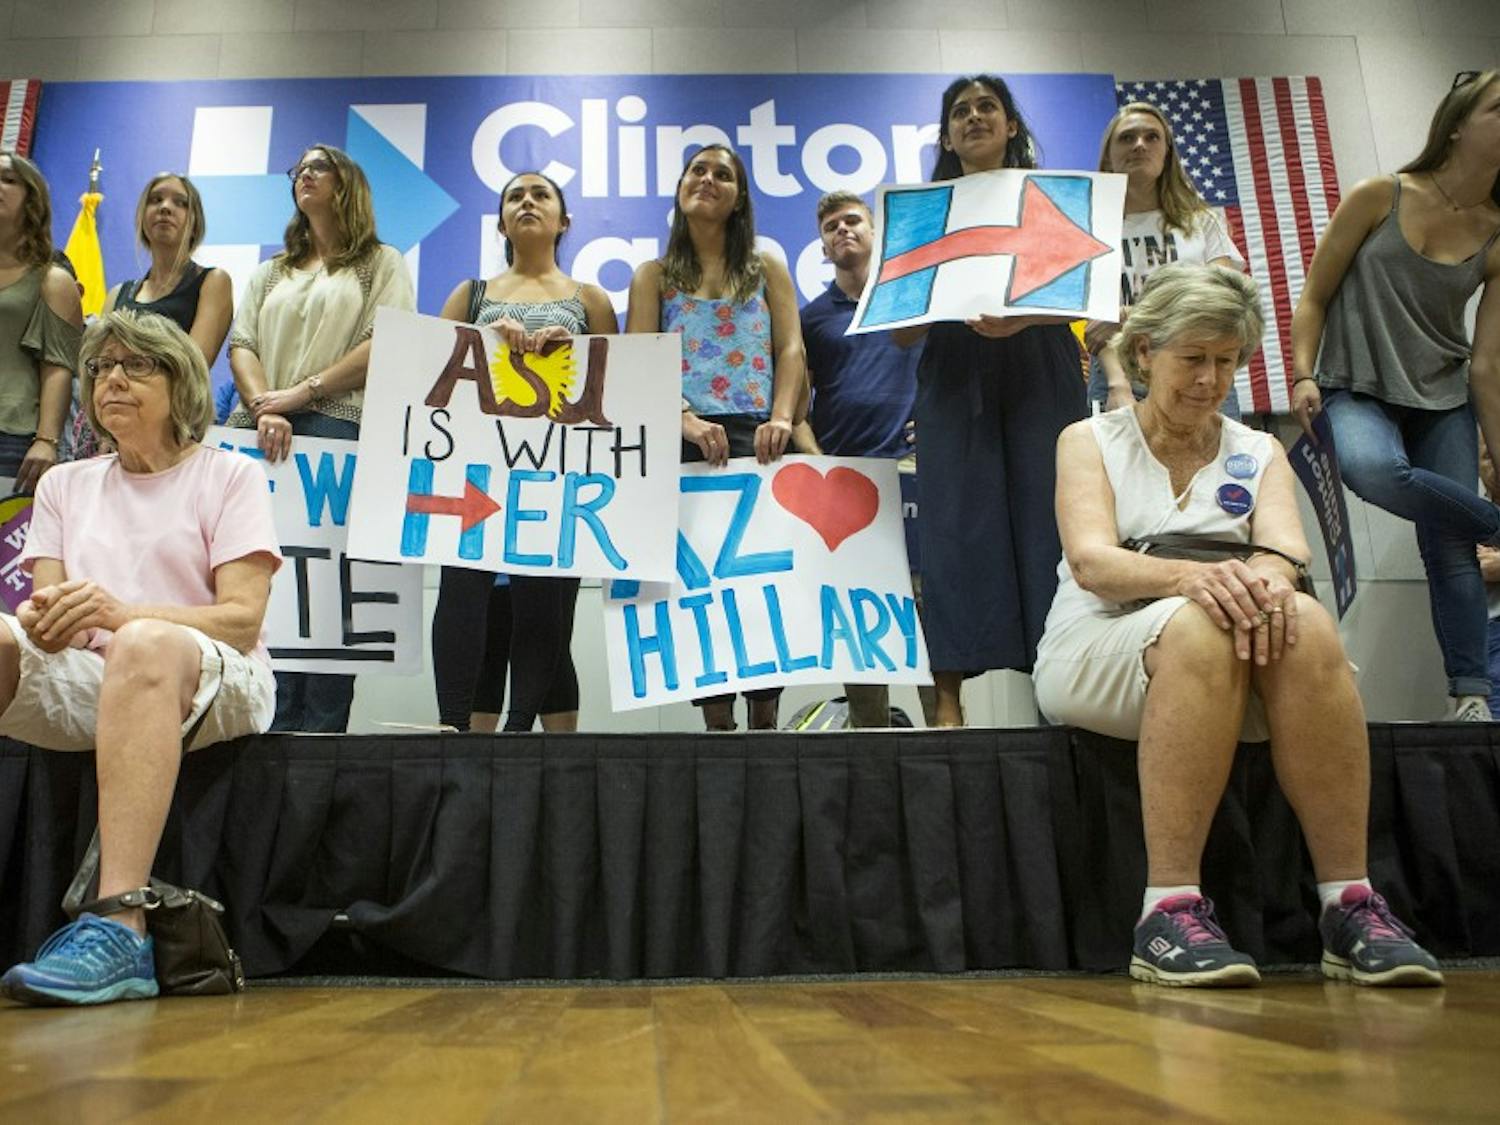 Supporters watch Chelsea Clinton speak during a stop for the Hillary Clinton campaign in the MU on the Tempe campus on Wednesday, Oct. 19, 2016. 